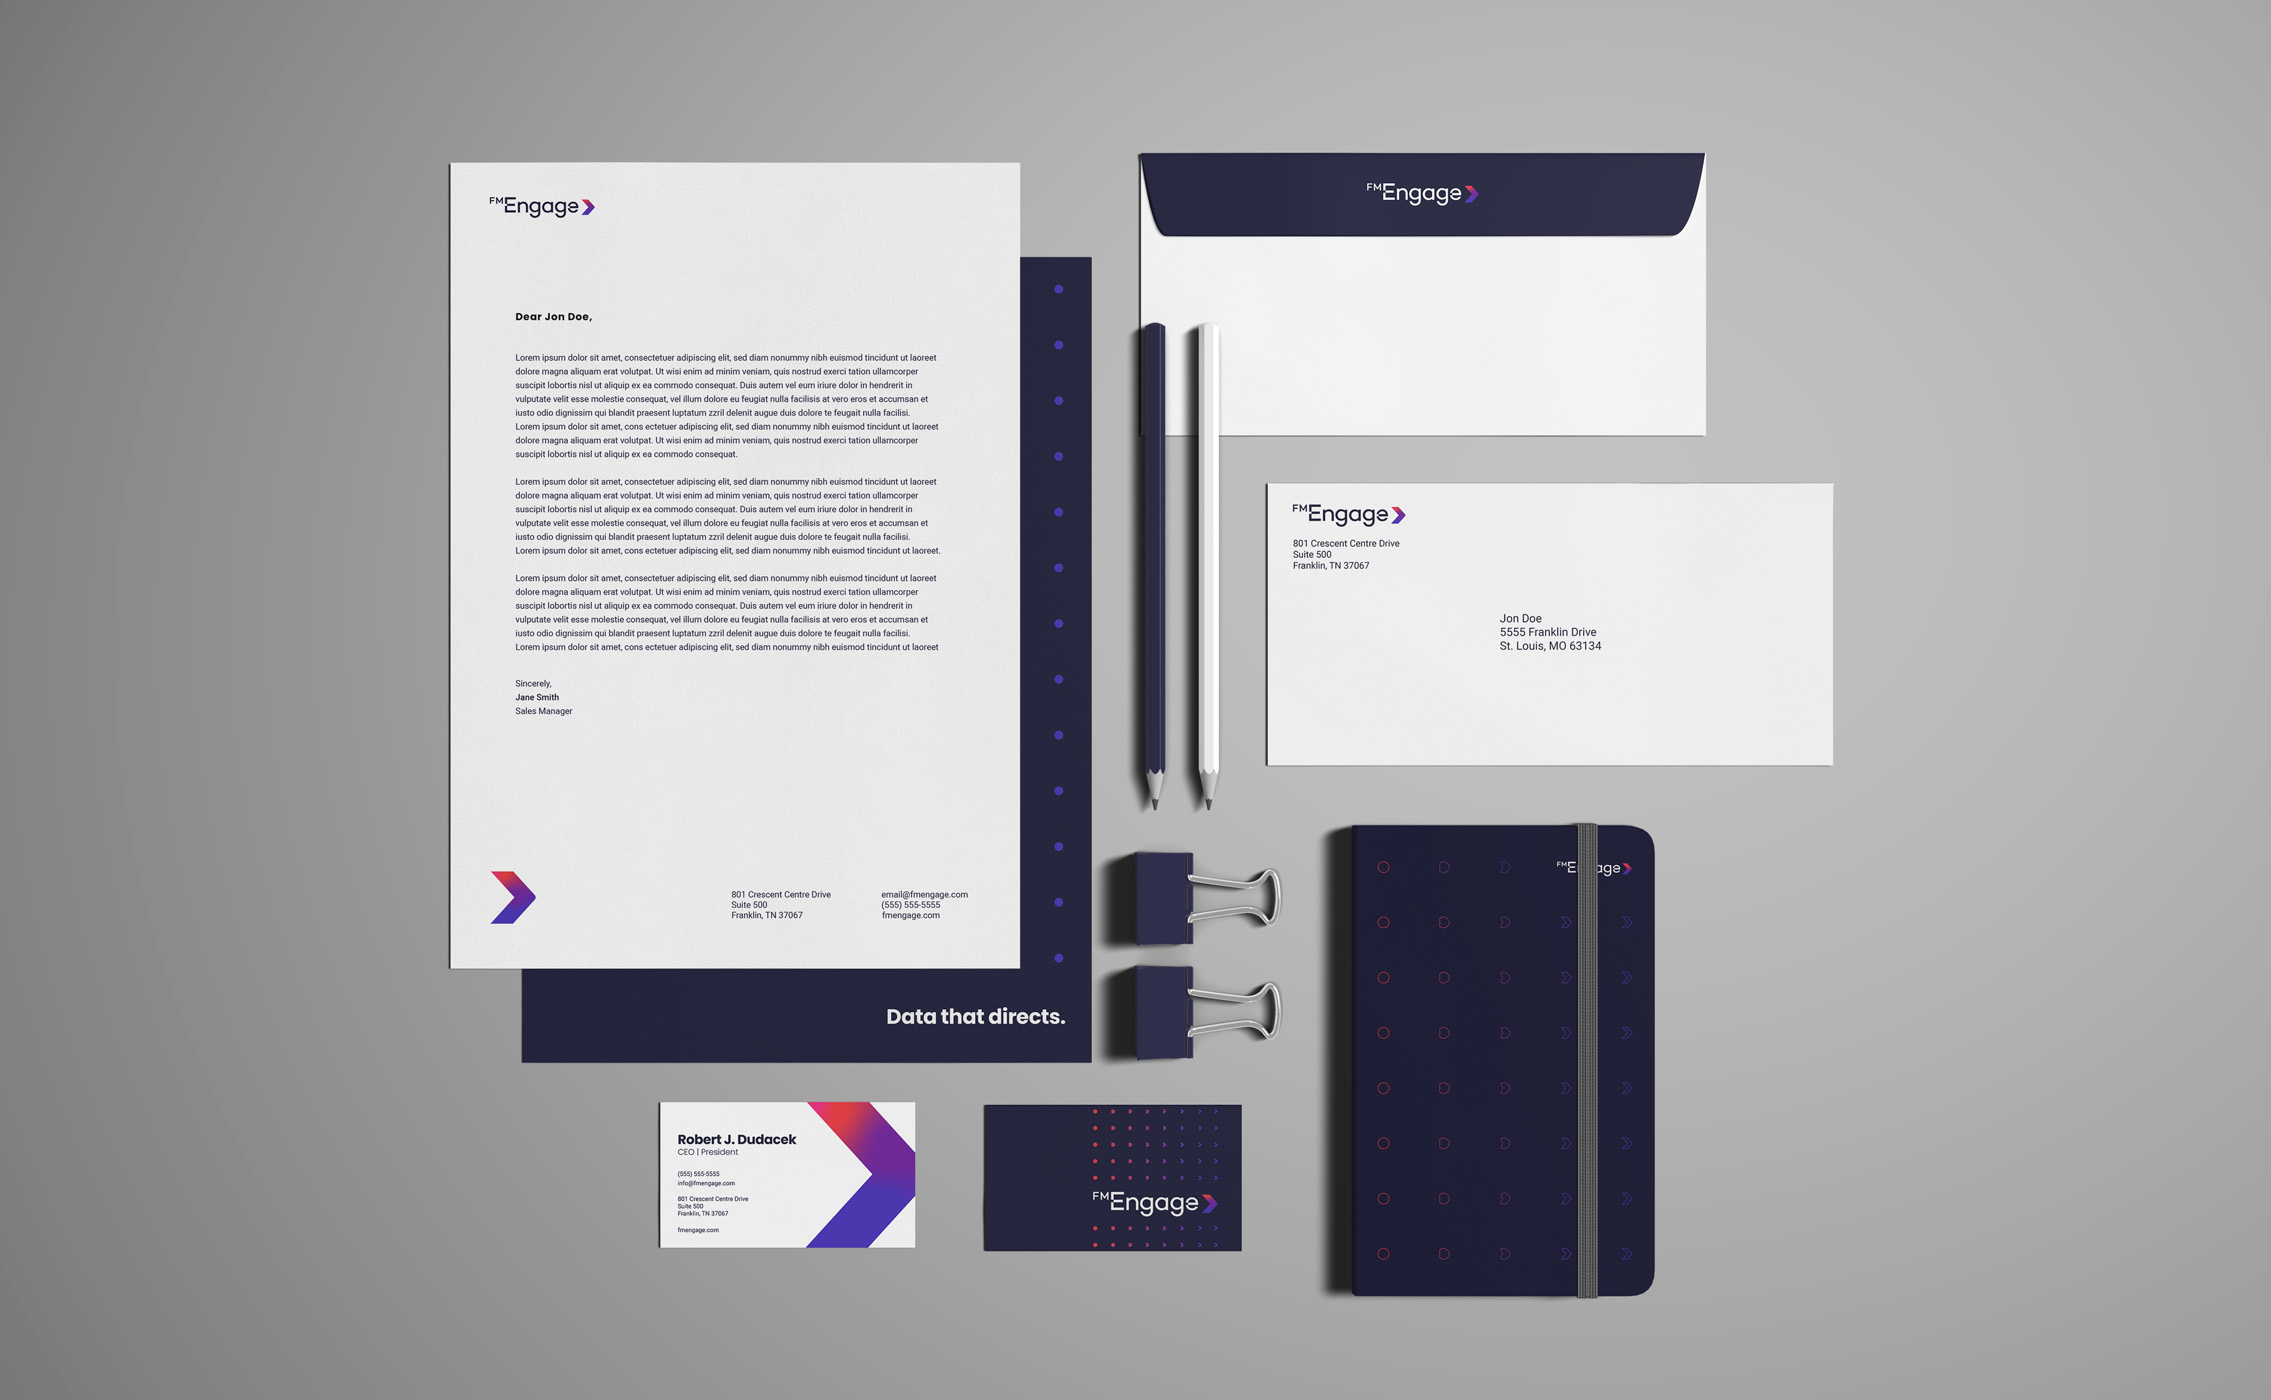 Updated business cards, letterhead and other marketing and sales collateral reflect the FM Engage brand